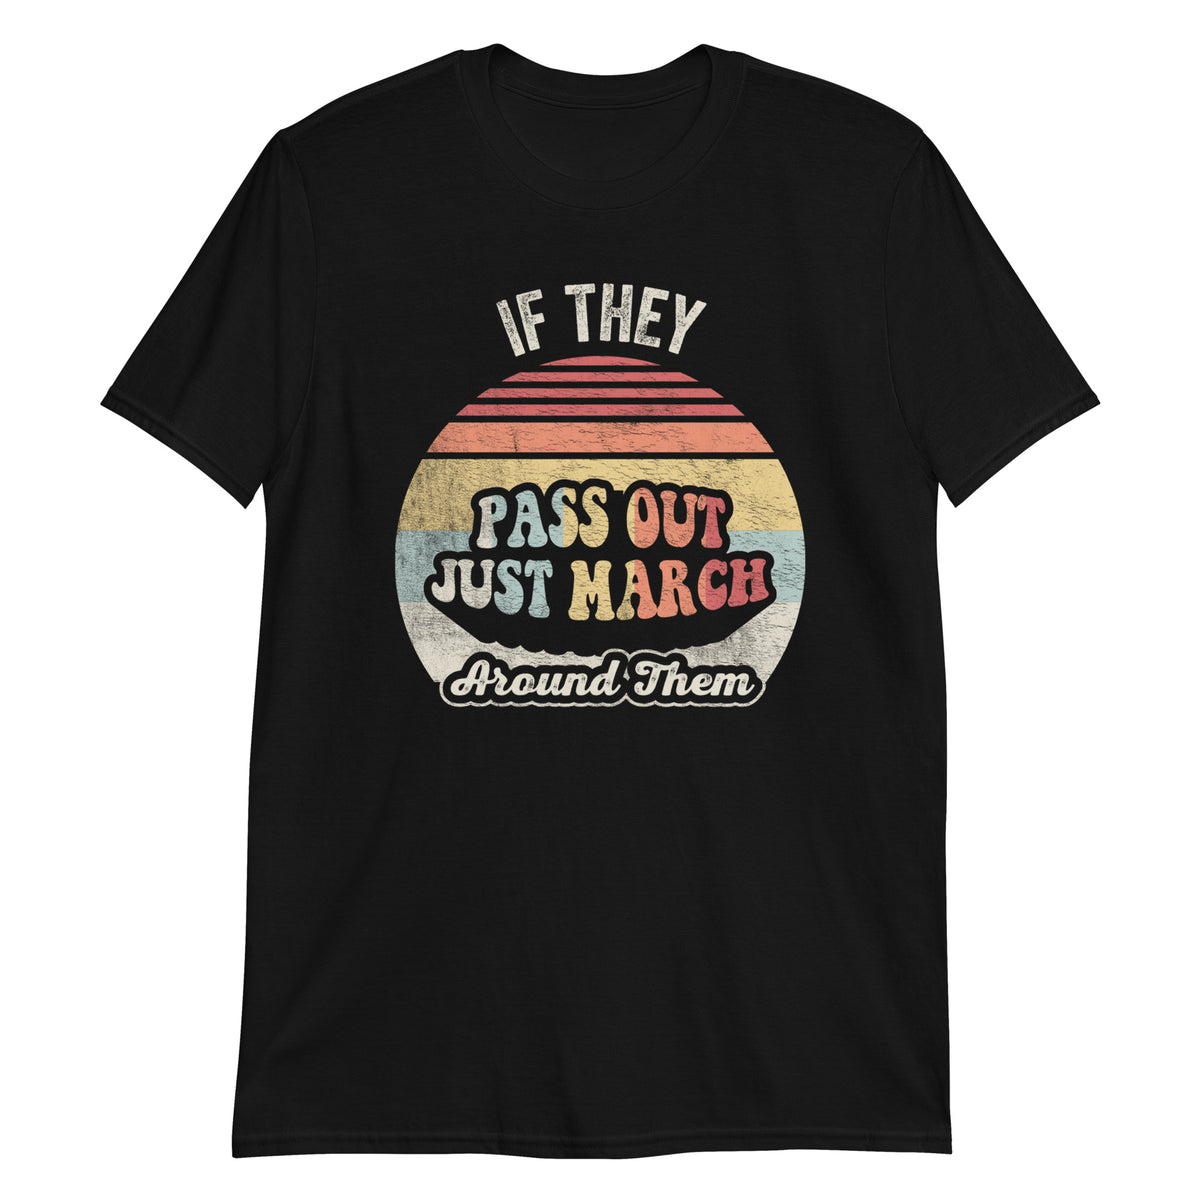 If They Pass Out Just March Around Them Marching Band Director Funny T-Shirt